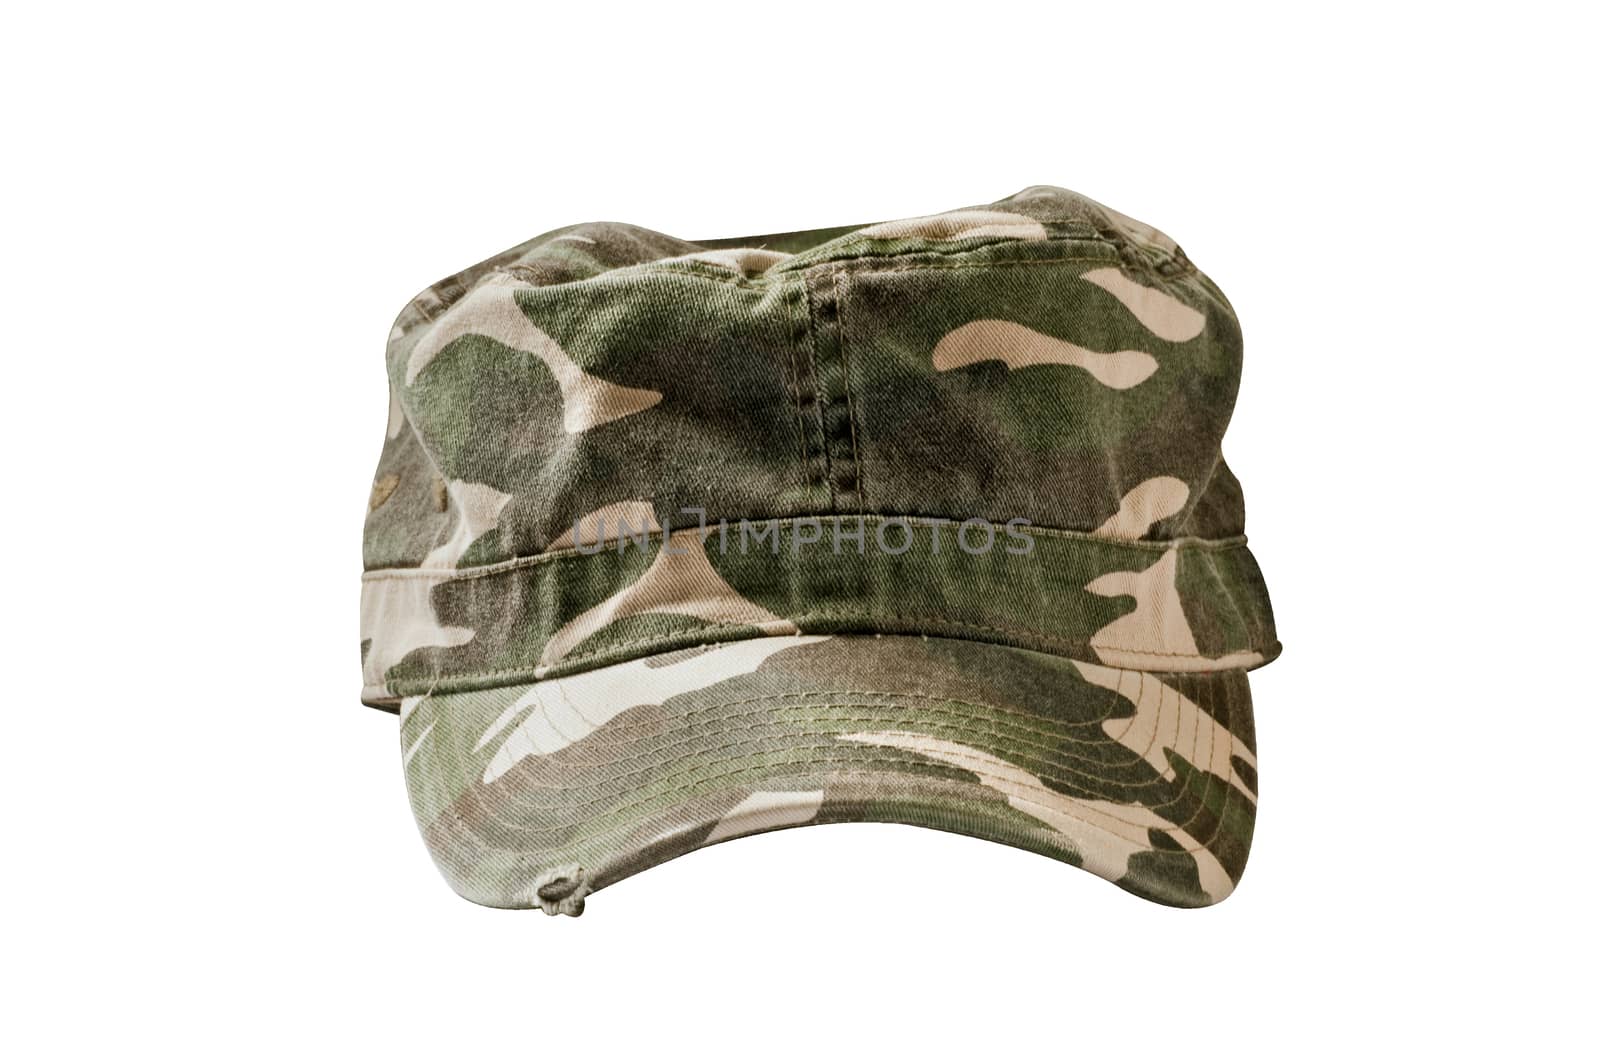 Front view of a camouflage cap used by amies and hunters around the world. Isolated on a white background.